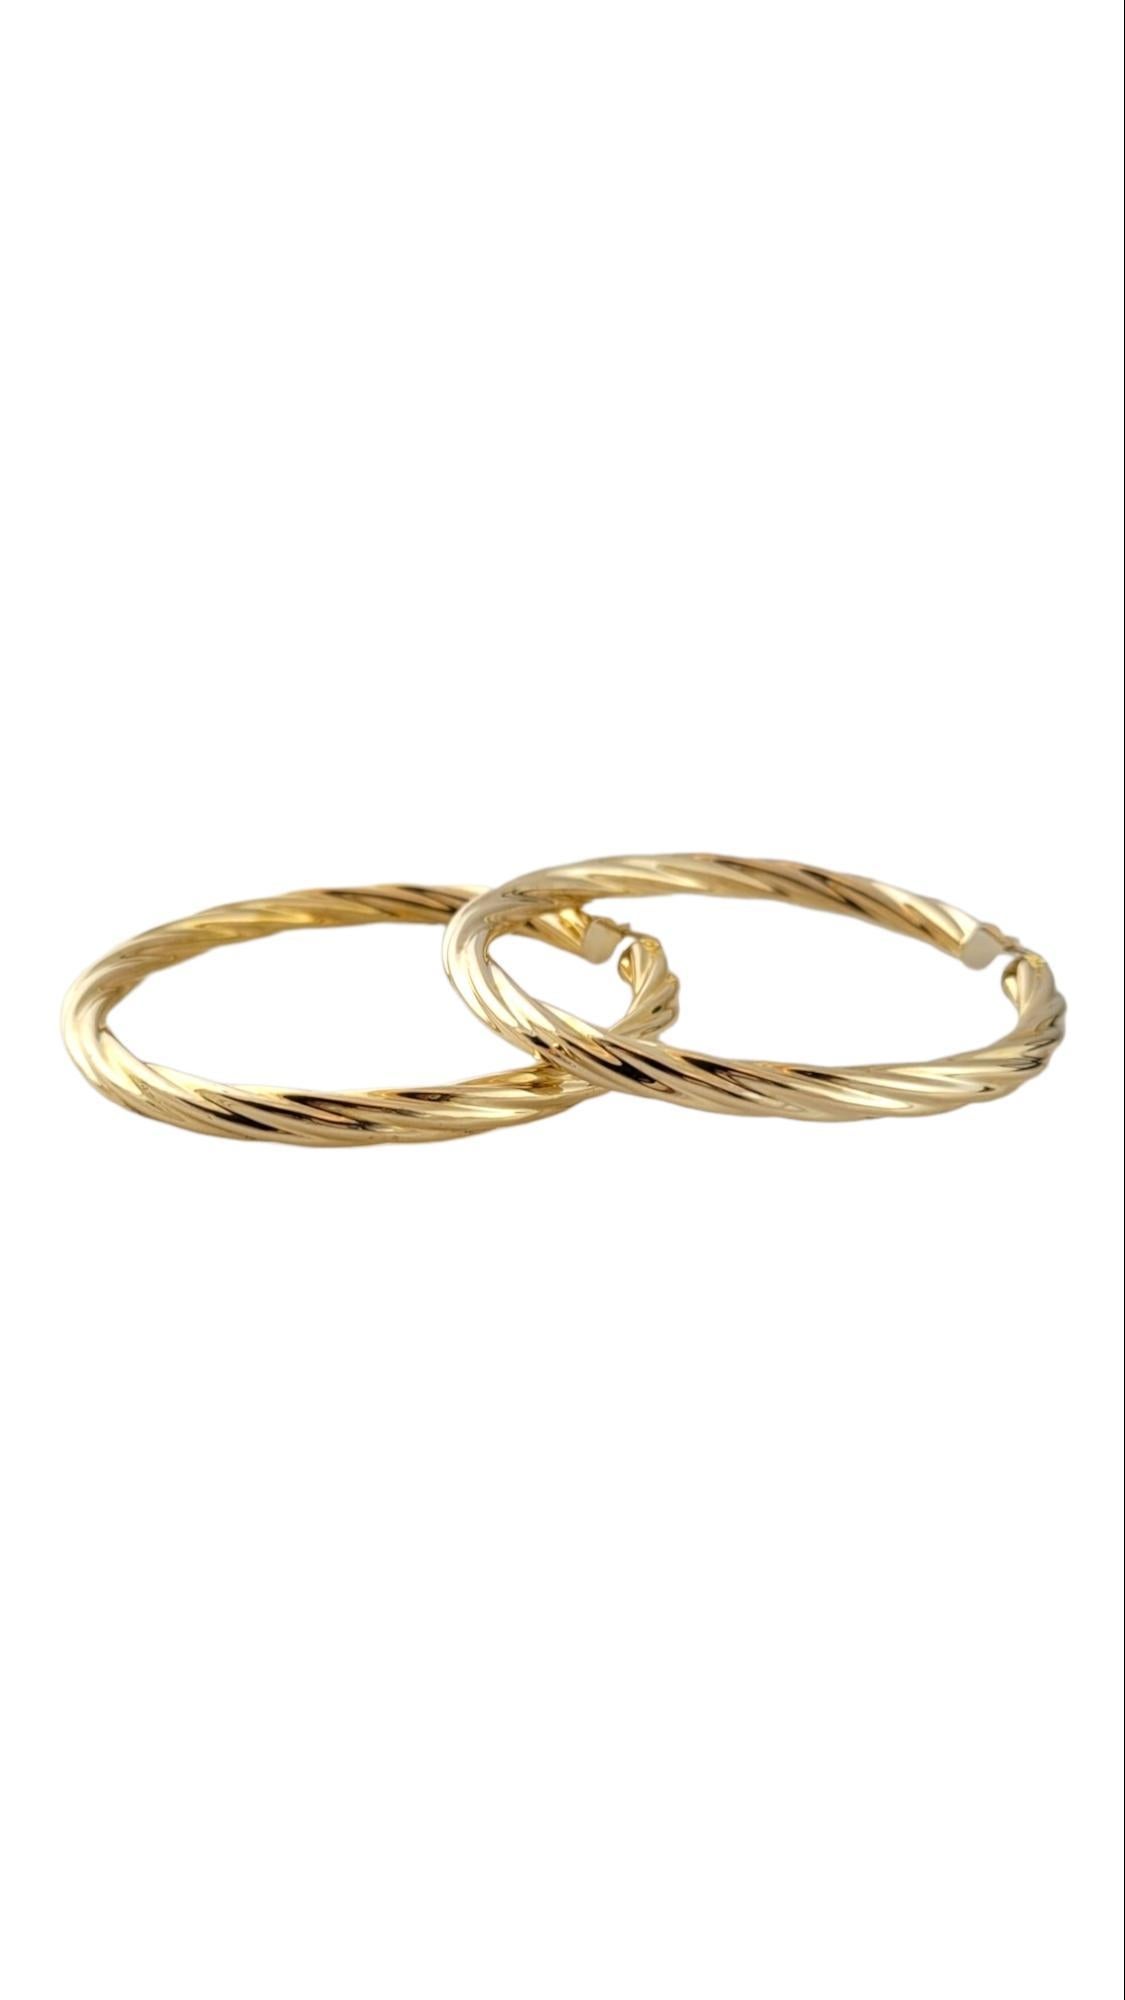 14K Yellow Gold X-Large Twisted Hoop Earrings #15158 In Good Condition For Sale In Washington Depot, CT